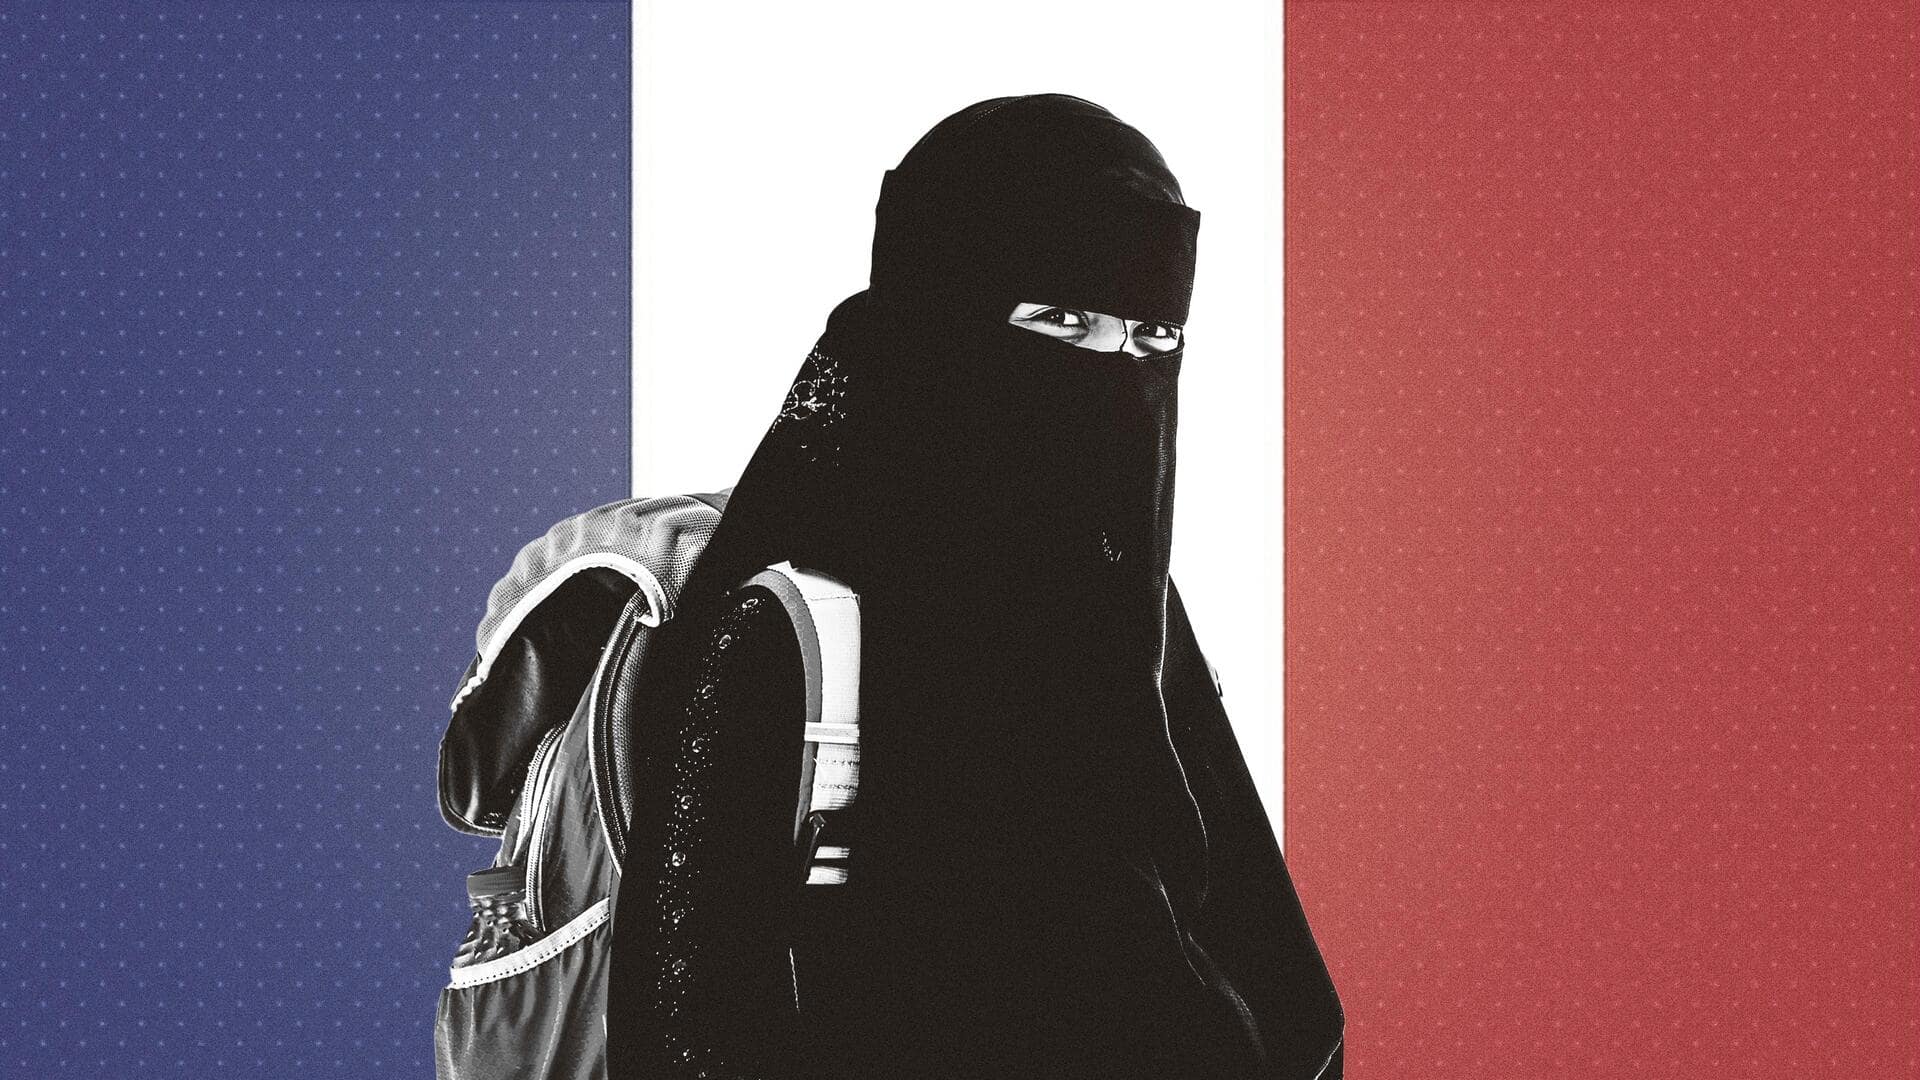 France announces ban on wearing Islamic dress in schools